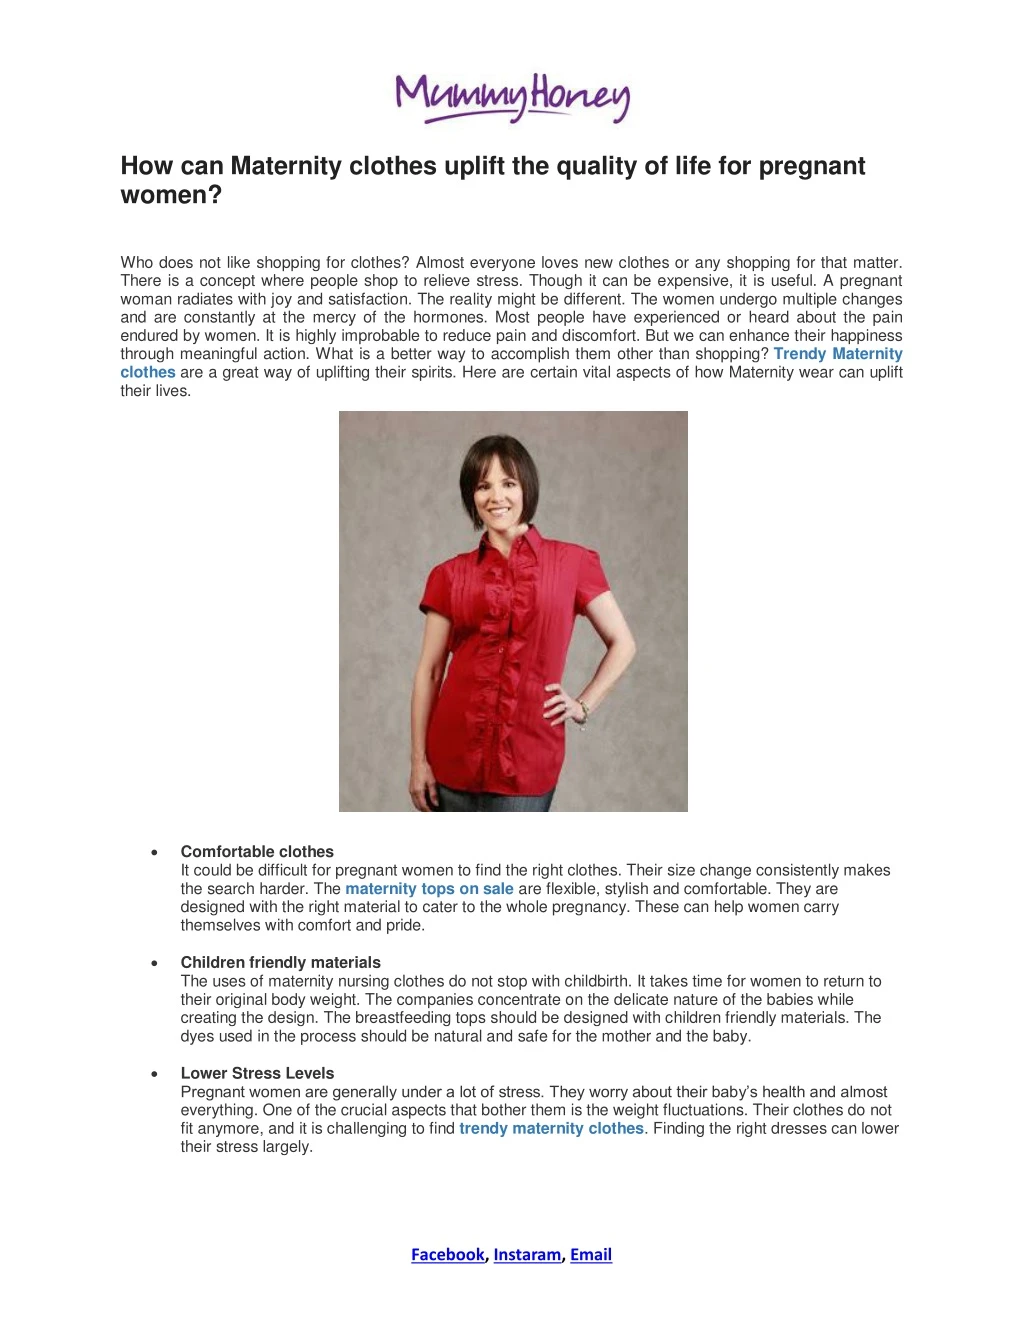 how can maternity clothes uplift the quality